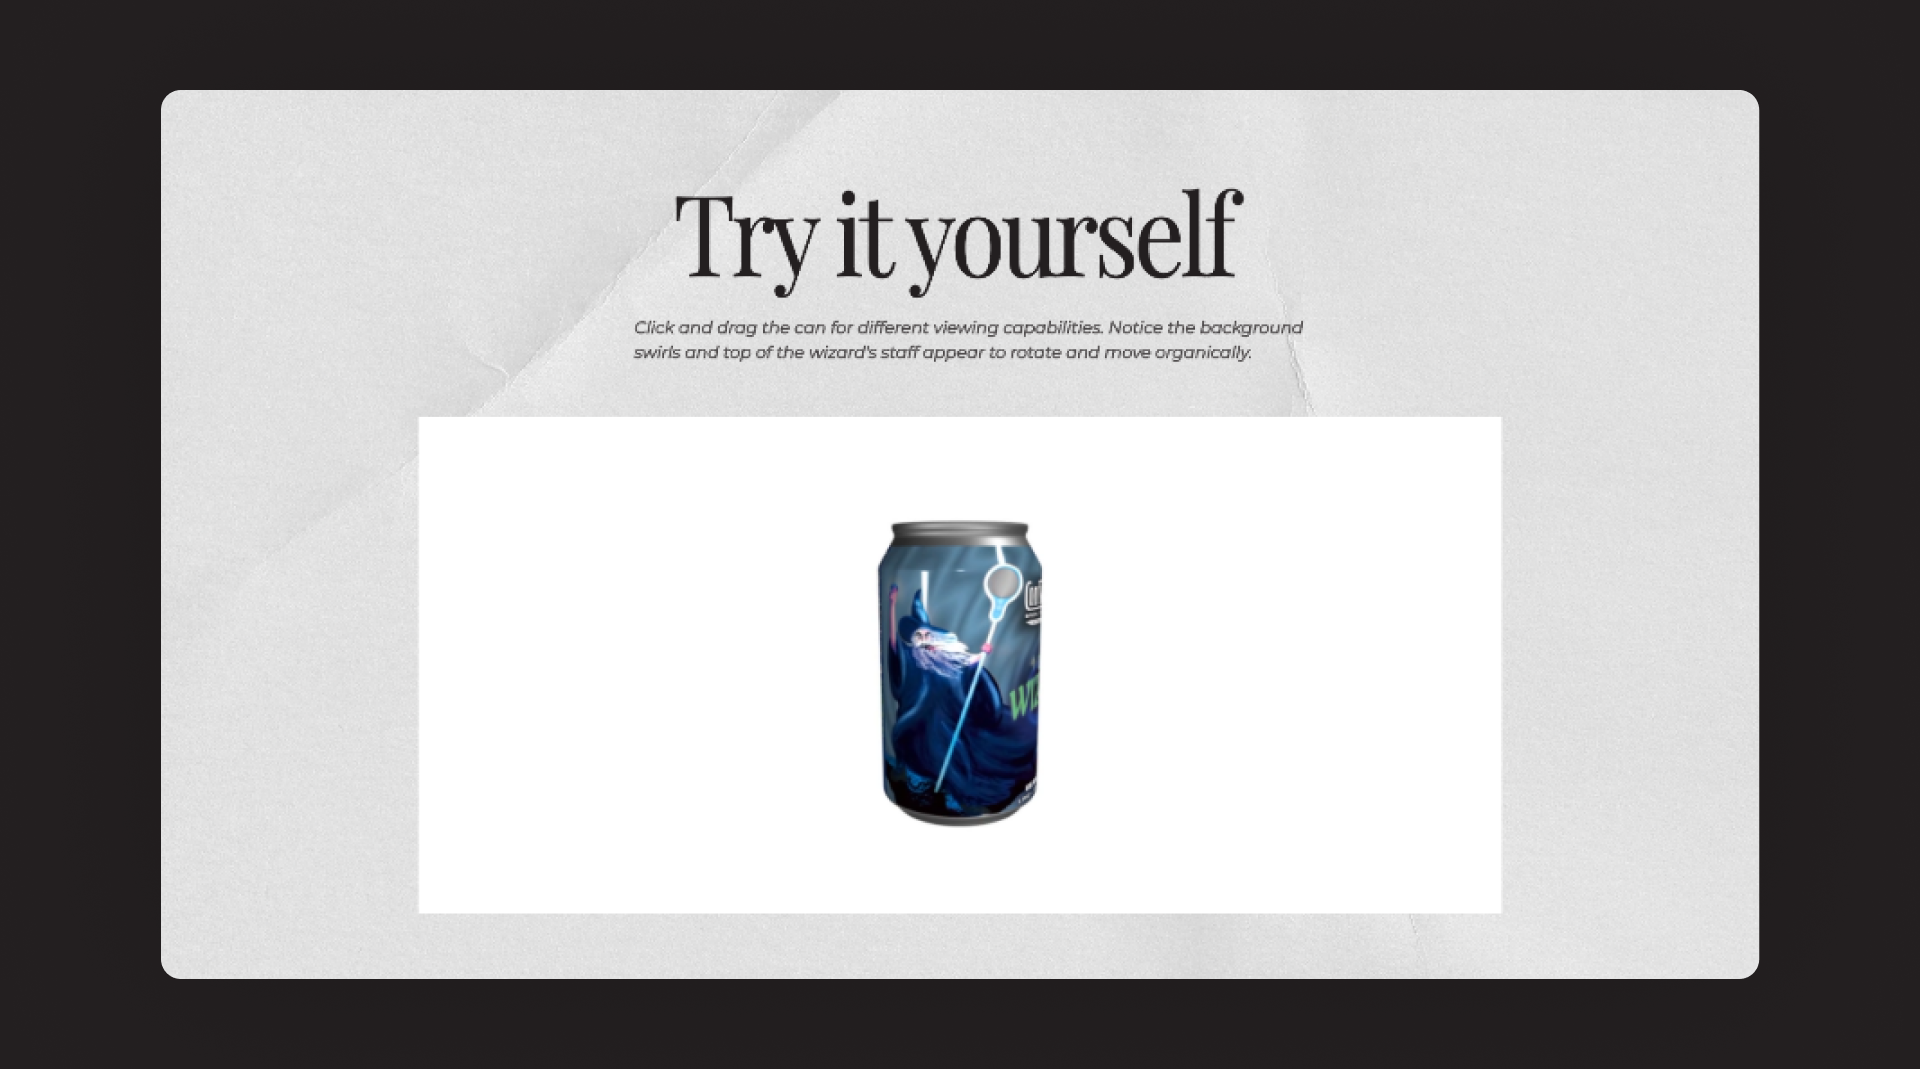 Image showing the final UI for the 'Try it yourself' section for Fathom's new website.